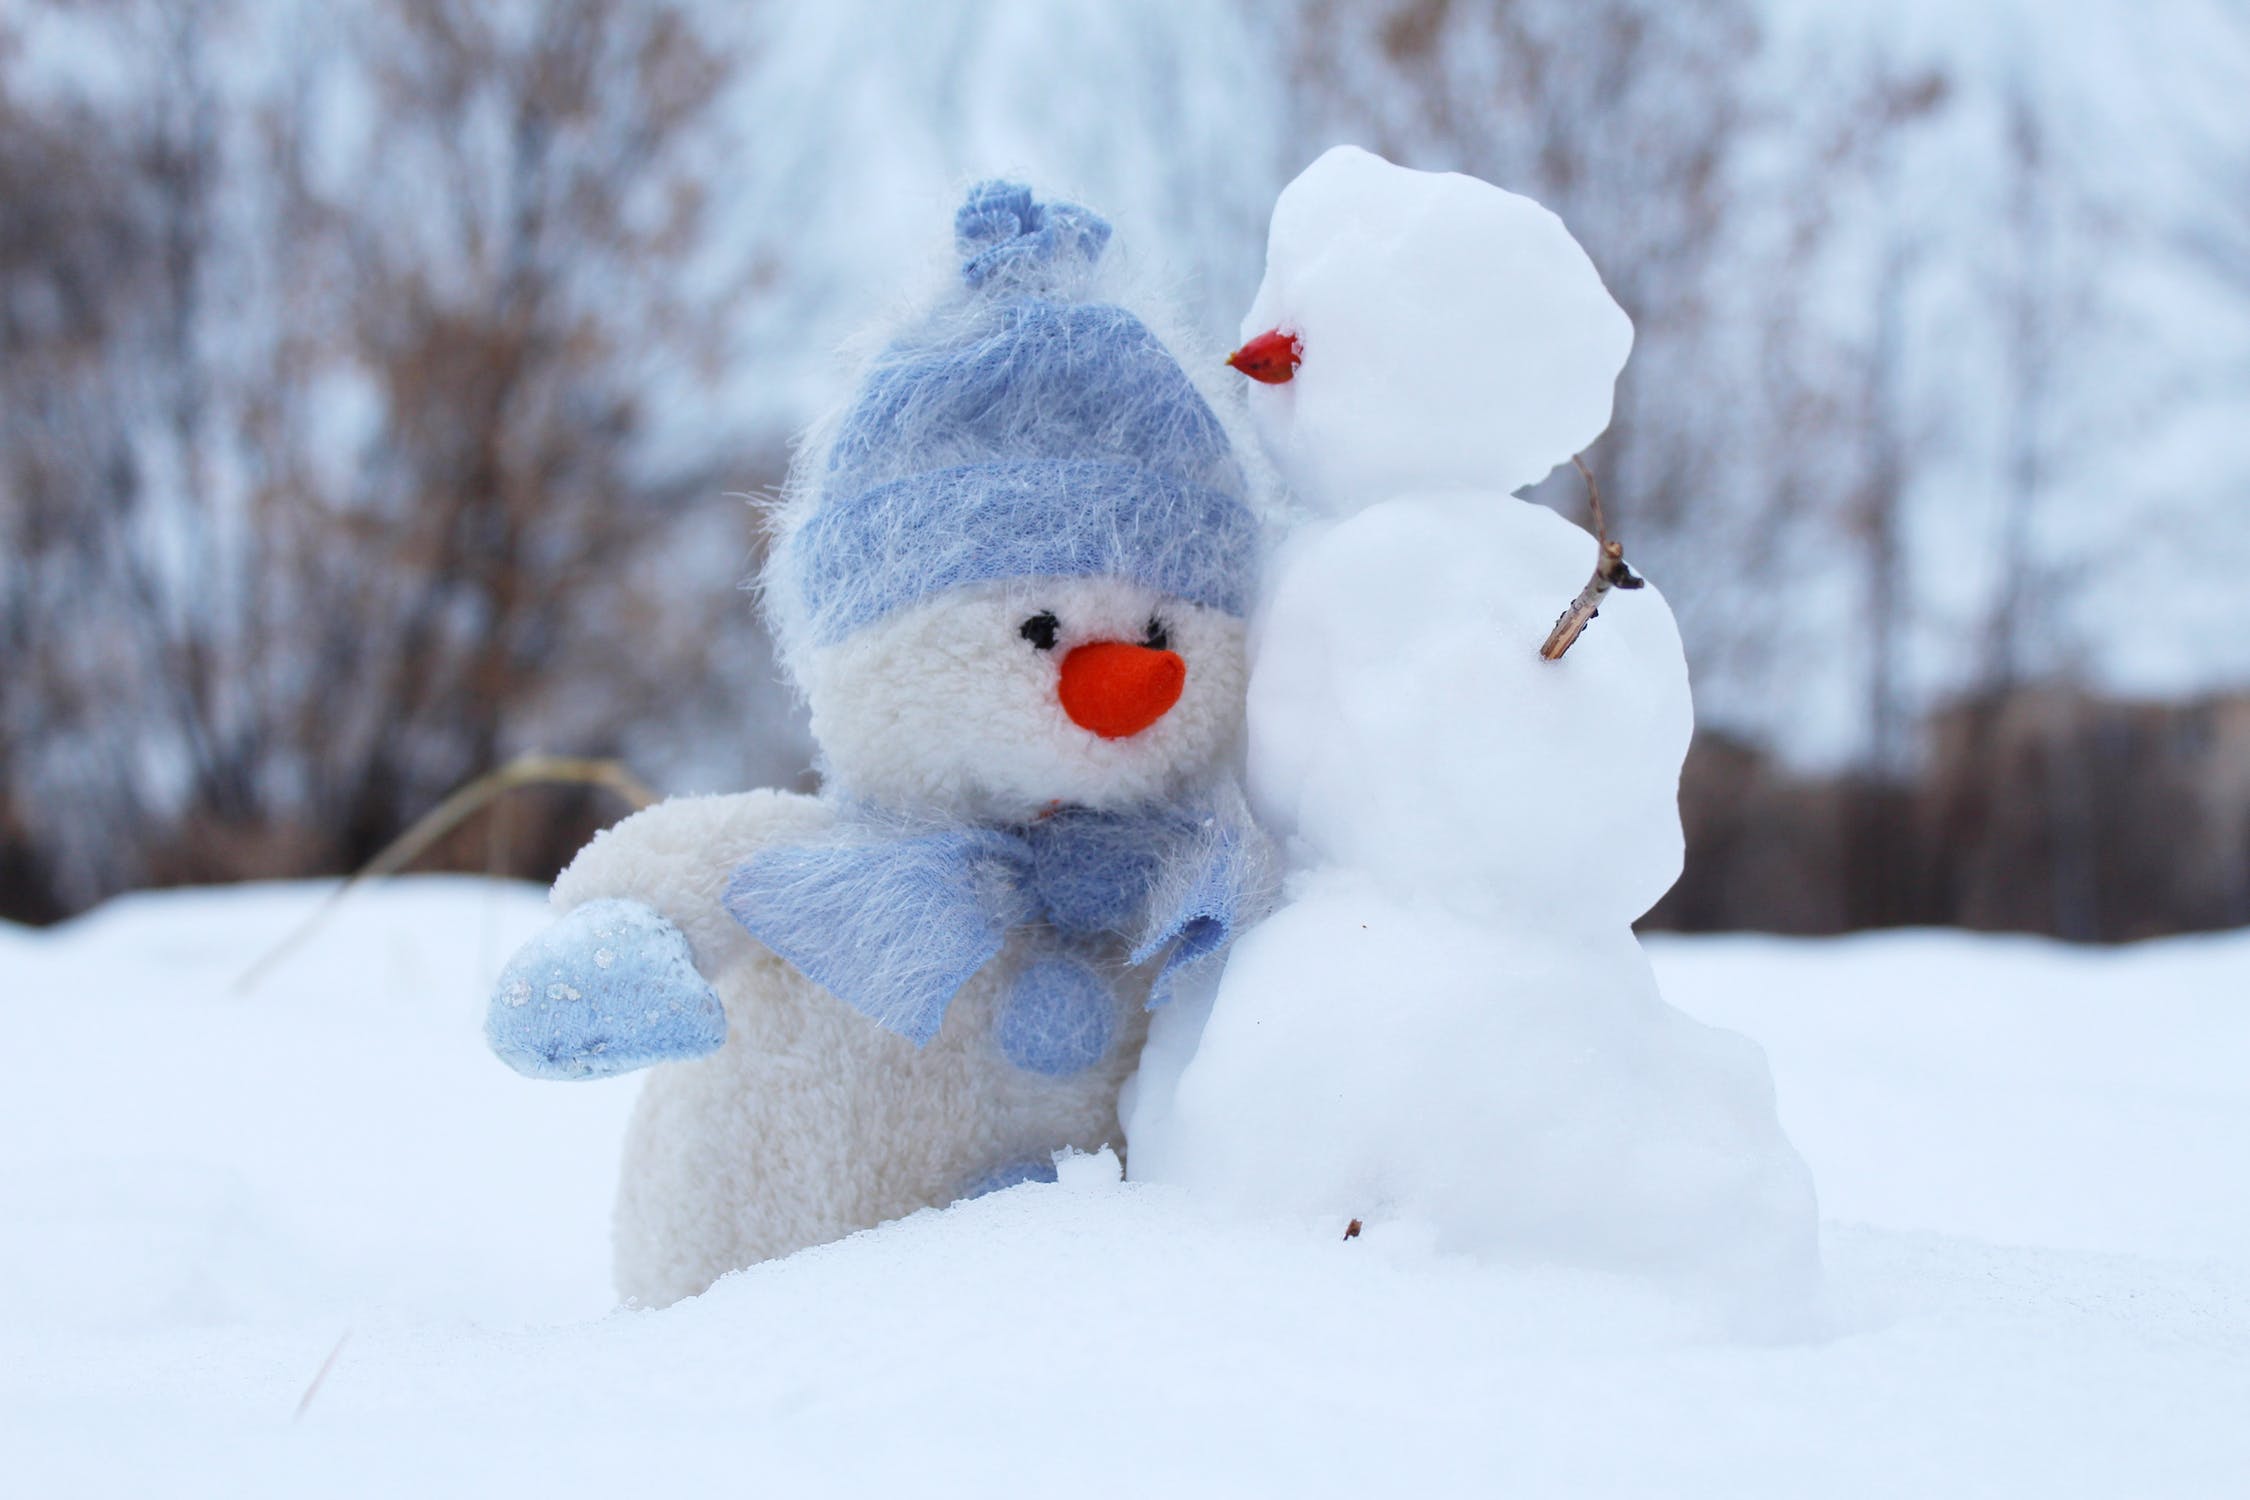 A picture of a fuzzy stuffed snowman toy with a blue hat and blue scarf next to a real snowball sized snowman